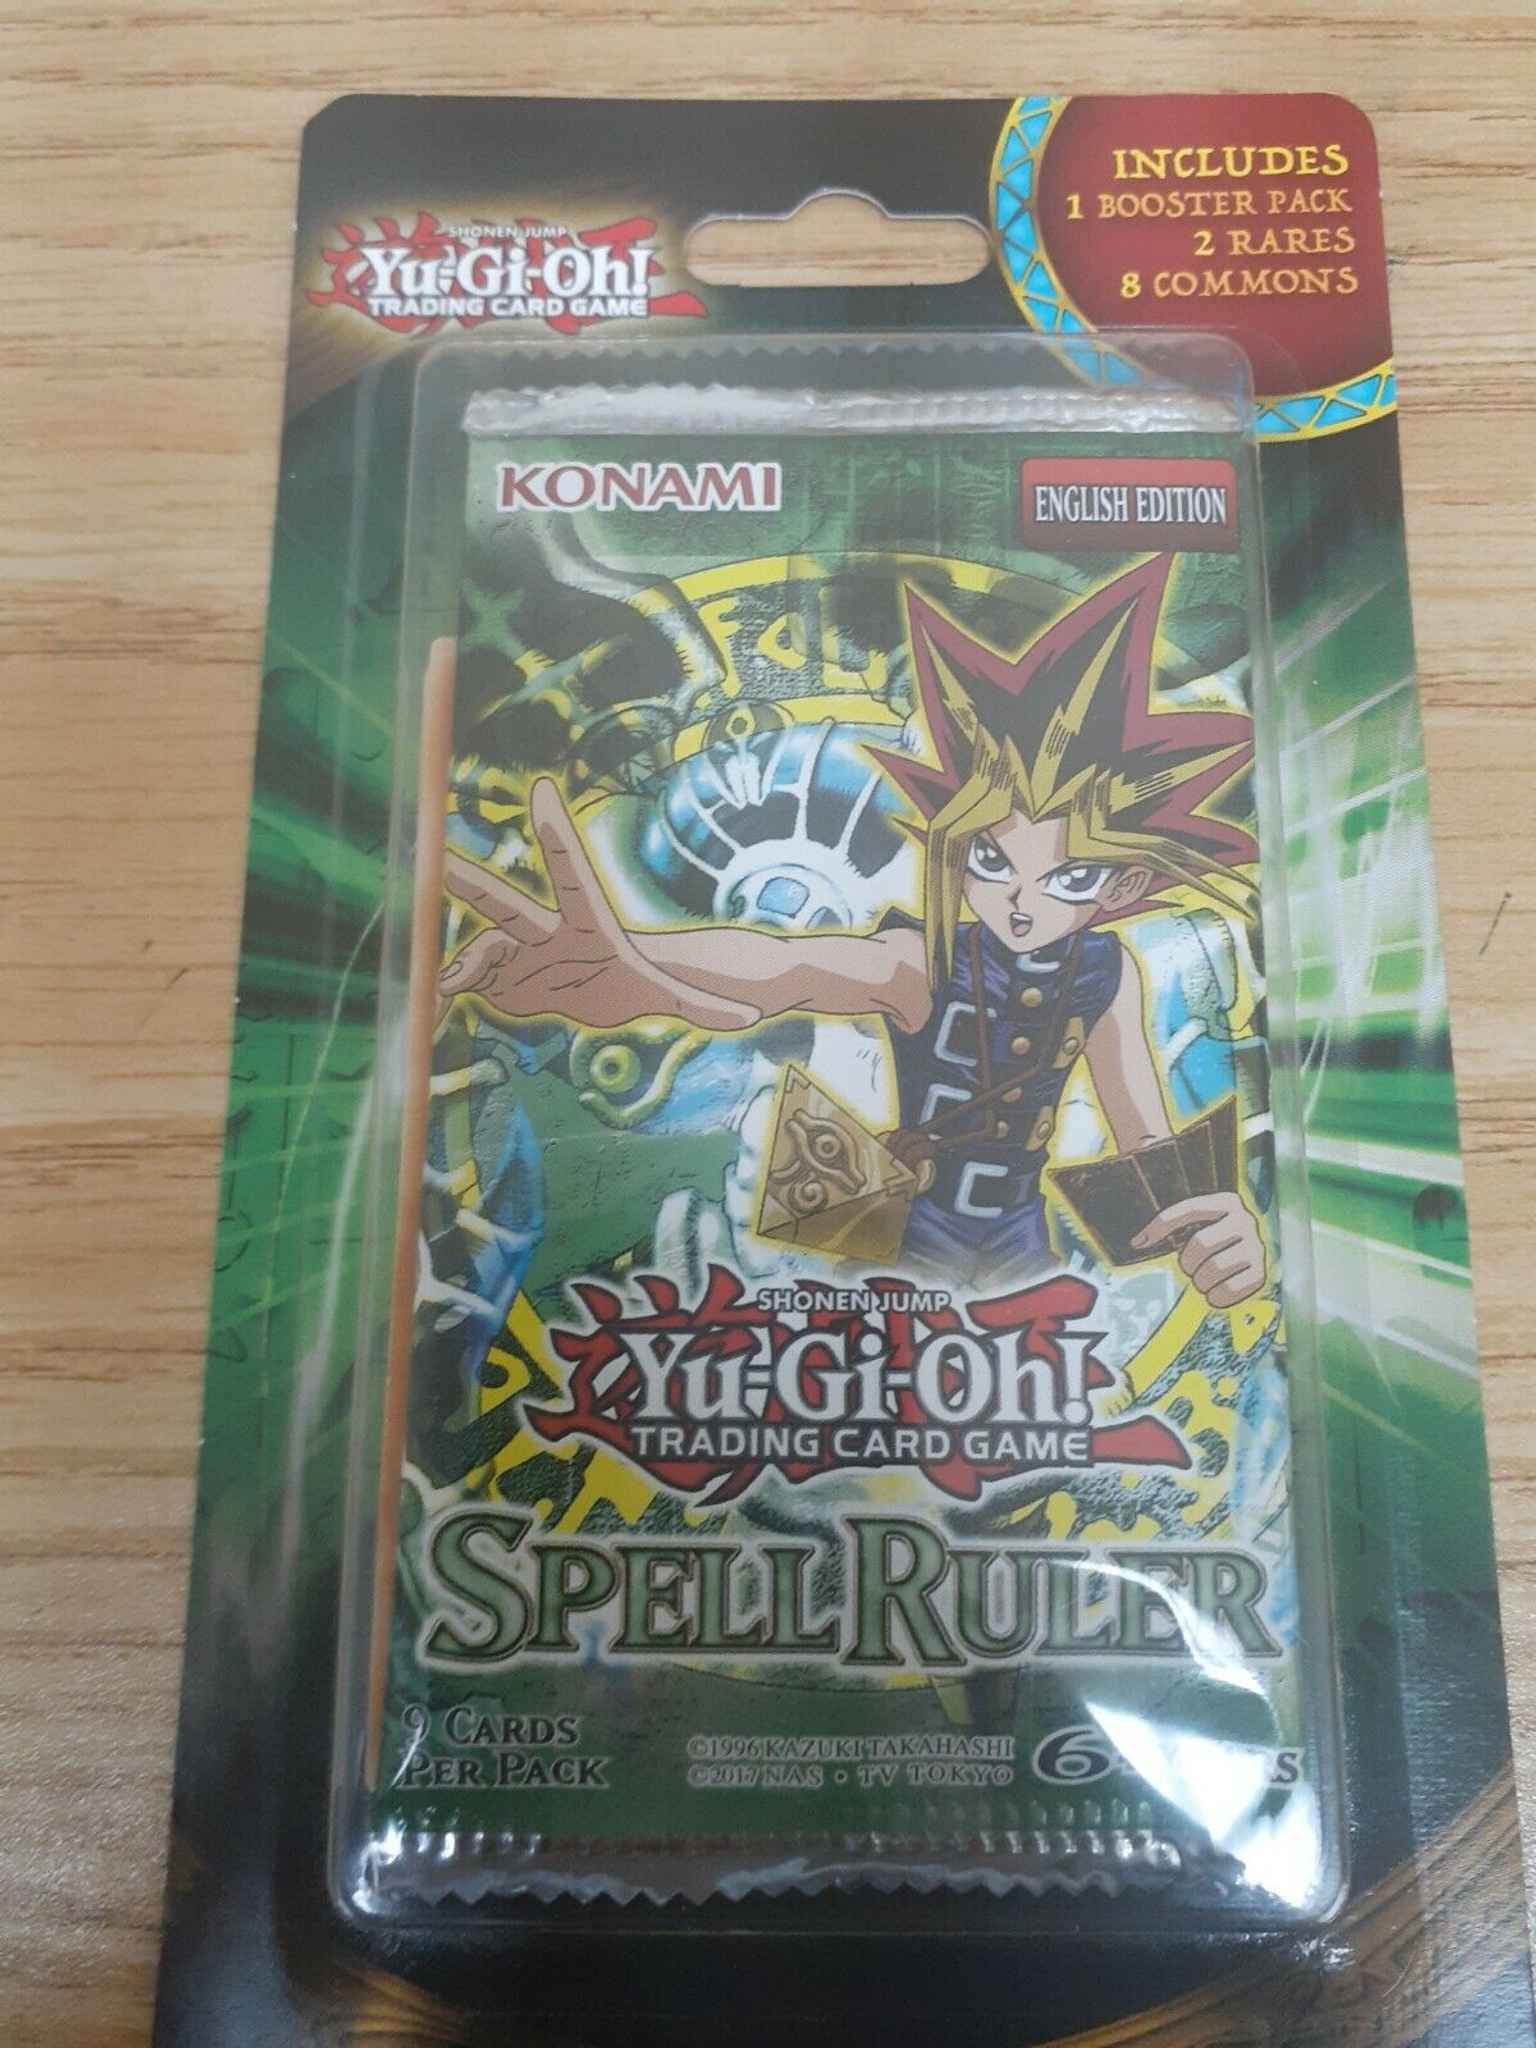 BLISTER PACK YUGIOH MAGIC RULER UNLIMITED EDITION FACTORY SEALED BOOSTER 